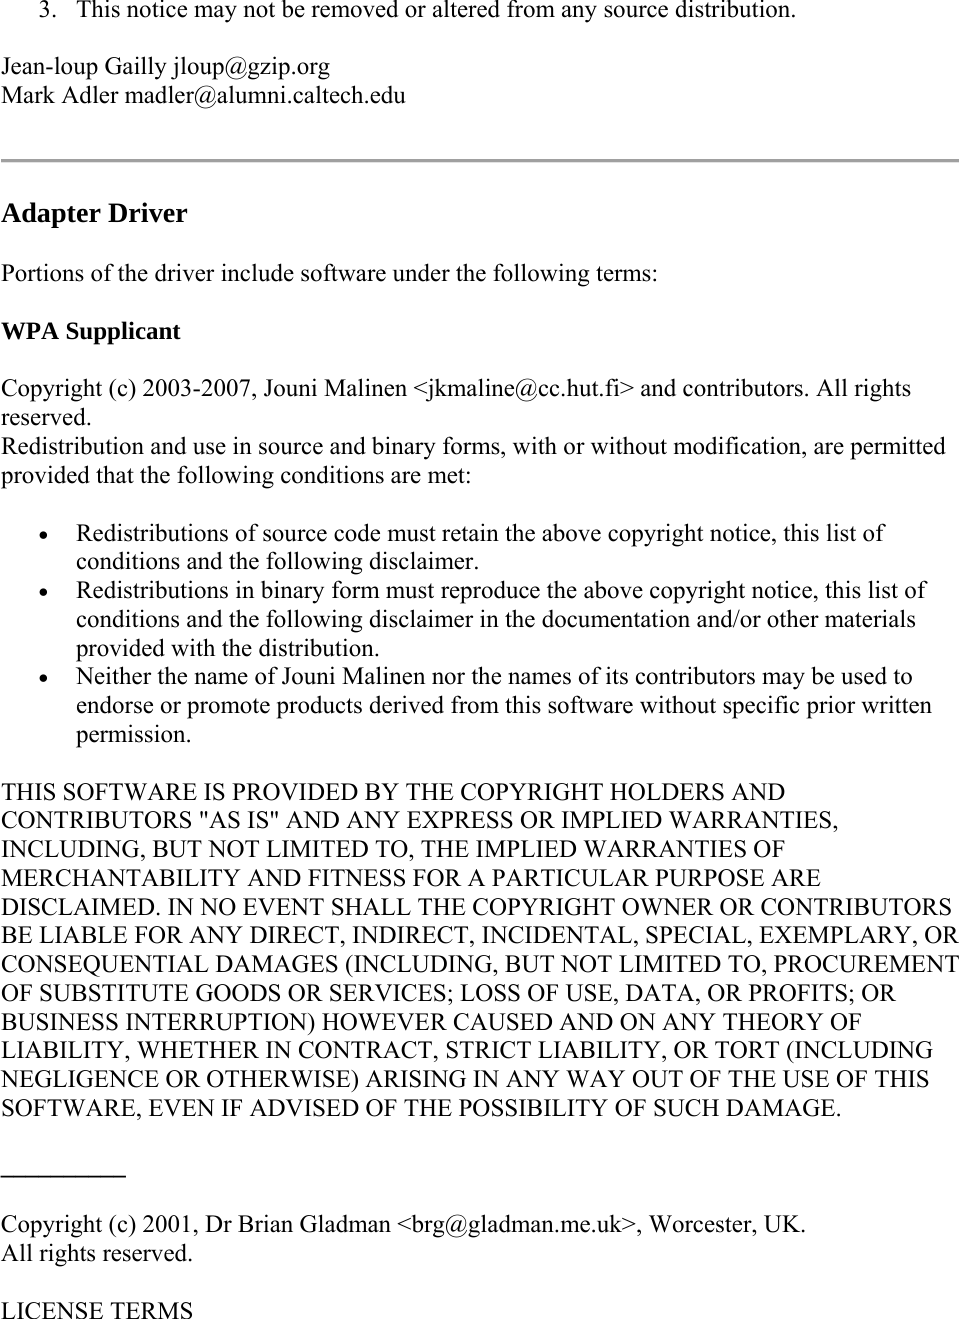 3. This notice may not be removed or altered from any source distribution. Jean-loup Gailly jloup@gzip.org Mark Adler madler@alumni.caltech.edu  Adapter Driver Portions of the driver include software under the following terms: WPA Supplicant Copyright (c) 2003-2007, Jouni Malinen &lt;jkmaline@cc.hut.fi&gt; and contributors. All rights reserved. Redistribution and use in source and binary forms, with or without modification, are permitted provided that the following conditions are met:   Redistributions of source code must retain the above copyright notice, this list of conditions and the following disclaimer.  Redistributions in binary form must reproduce the above copyright notice, this list of conditions and the following disclaimer in the documentation and/or other materials provided with the distribution.  Neither the name of Jouni Malinen nor the names of its contributors may be used to endorse or promote products derived from this software without specific prior written permission. THIS SOFTWARE IS PROVIDED BY THE COPYRIGHT HOLDERS AND CONTRIBUTORS &quot;AS IS&quot; AND ANY EXPRESS OR IMPLIED WARRANTIES, INCLUDING, BUT NOT LIMITED TO, THE IMPLIED WARRANTIES OF MERCHANTABILITY AND FITNESS FOR A PARTICULAR PURPOSE ARE DISCLAIMED. IN NO EVENT SHALL THE COPYRIGHT OWNER OR CONTRIBUTORS BE LIABLE FOR ANY DIRECT, INDIRECT, INCIDENTAL, SPECIAL, EXEMPLARY, OR CONSEQUENTIAL DAMAGES (INCLUDING, BUT NOT LIMITED TO, PROCUREMENT OF SUBSTITUTE GOODS OR SERVICES; LOSS OF USE, DATA, OR PROFITS; OR BUSINESS INTERRUPTION) HOWEVER CAUSED AND ON ANY THEORY OF LIABILITY, WHETHER IN CONTRACT, STRICT LIABILITY, OR TORT (INCLUDING NEGLIGENCE OR OTHERWISE) ARISING IN ANY WAY OUT OF THE USE OF THIS SOFTWARE, EVEN IF ADVISED OF THE POSSIBILITY OF SUCH DAMAGE. __________ Copyright (c) 2001, Dr Brian Gladman &lt;brg@gladman.me.uk&gt;, Worcester, UK. All rights reserved. LICENSE TERMS 